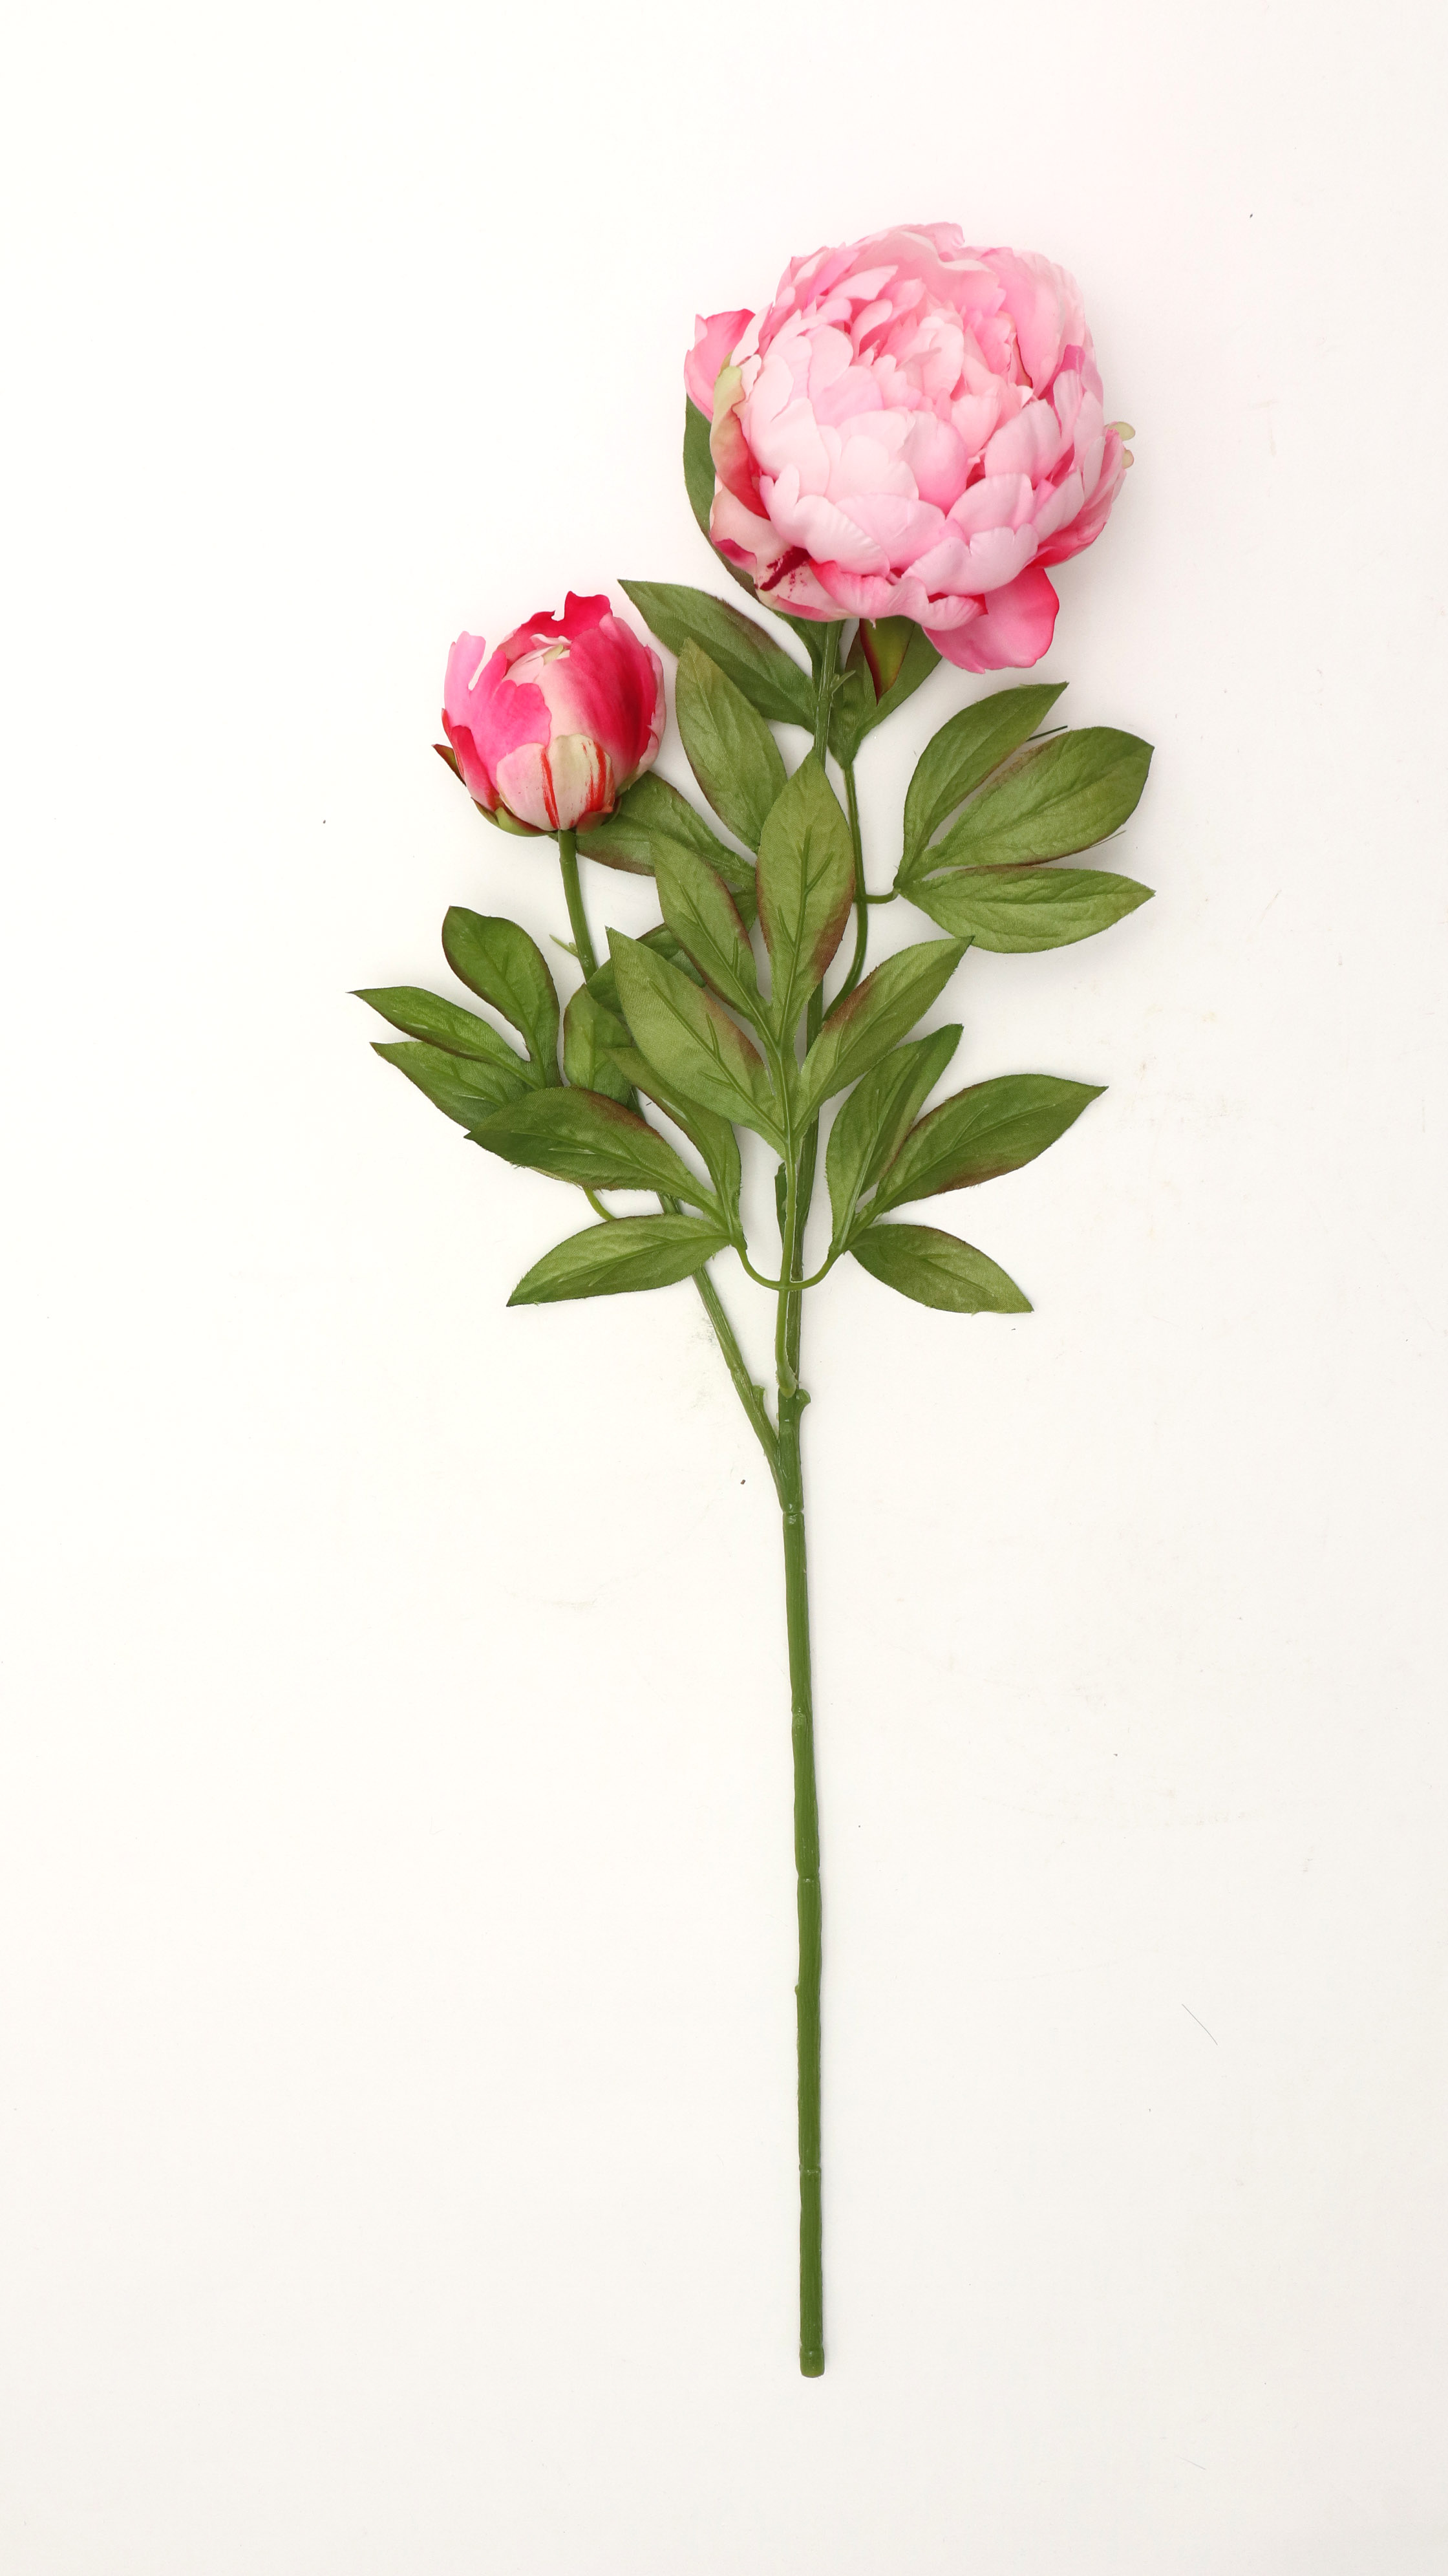 Mainstays 27" Tall Artificial Pink Peony Flower Indoor Stem - image 2 of 5